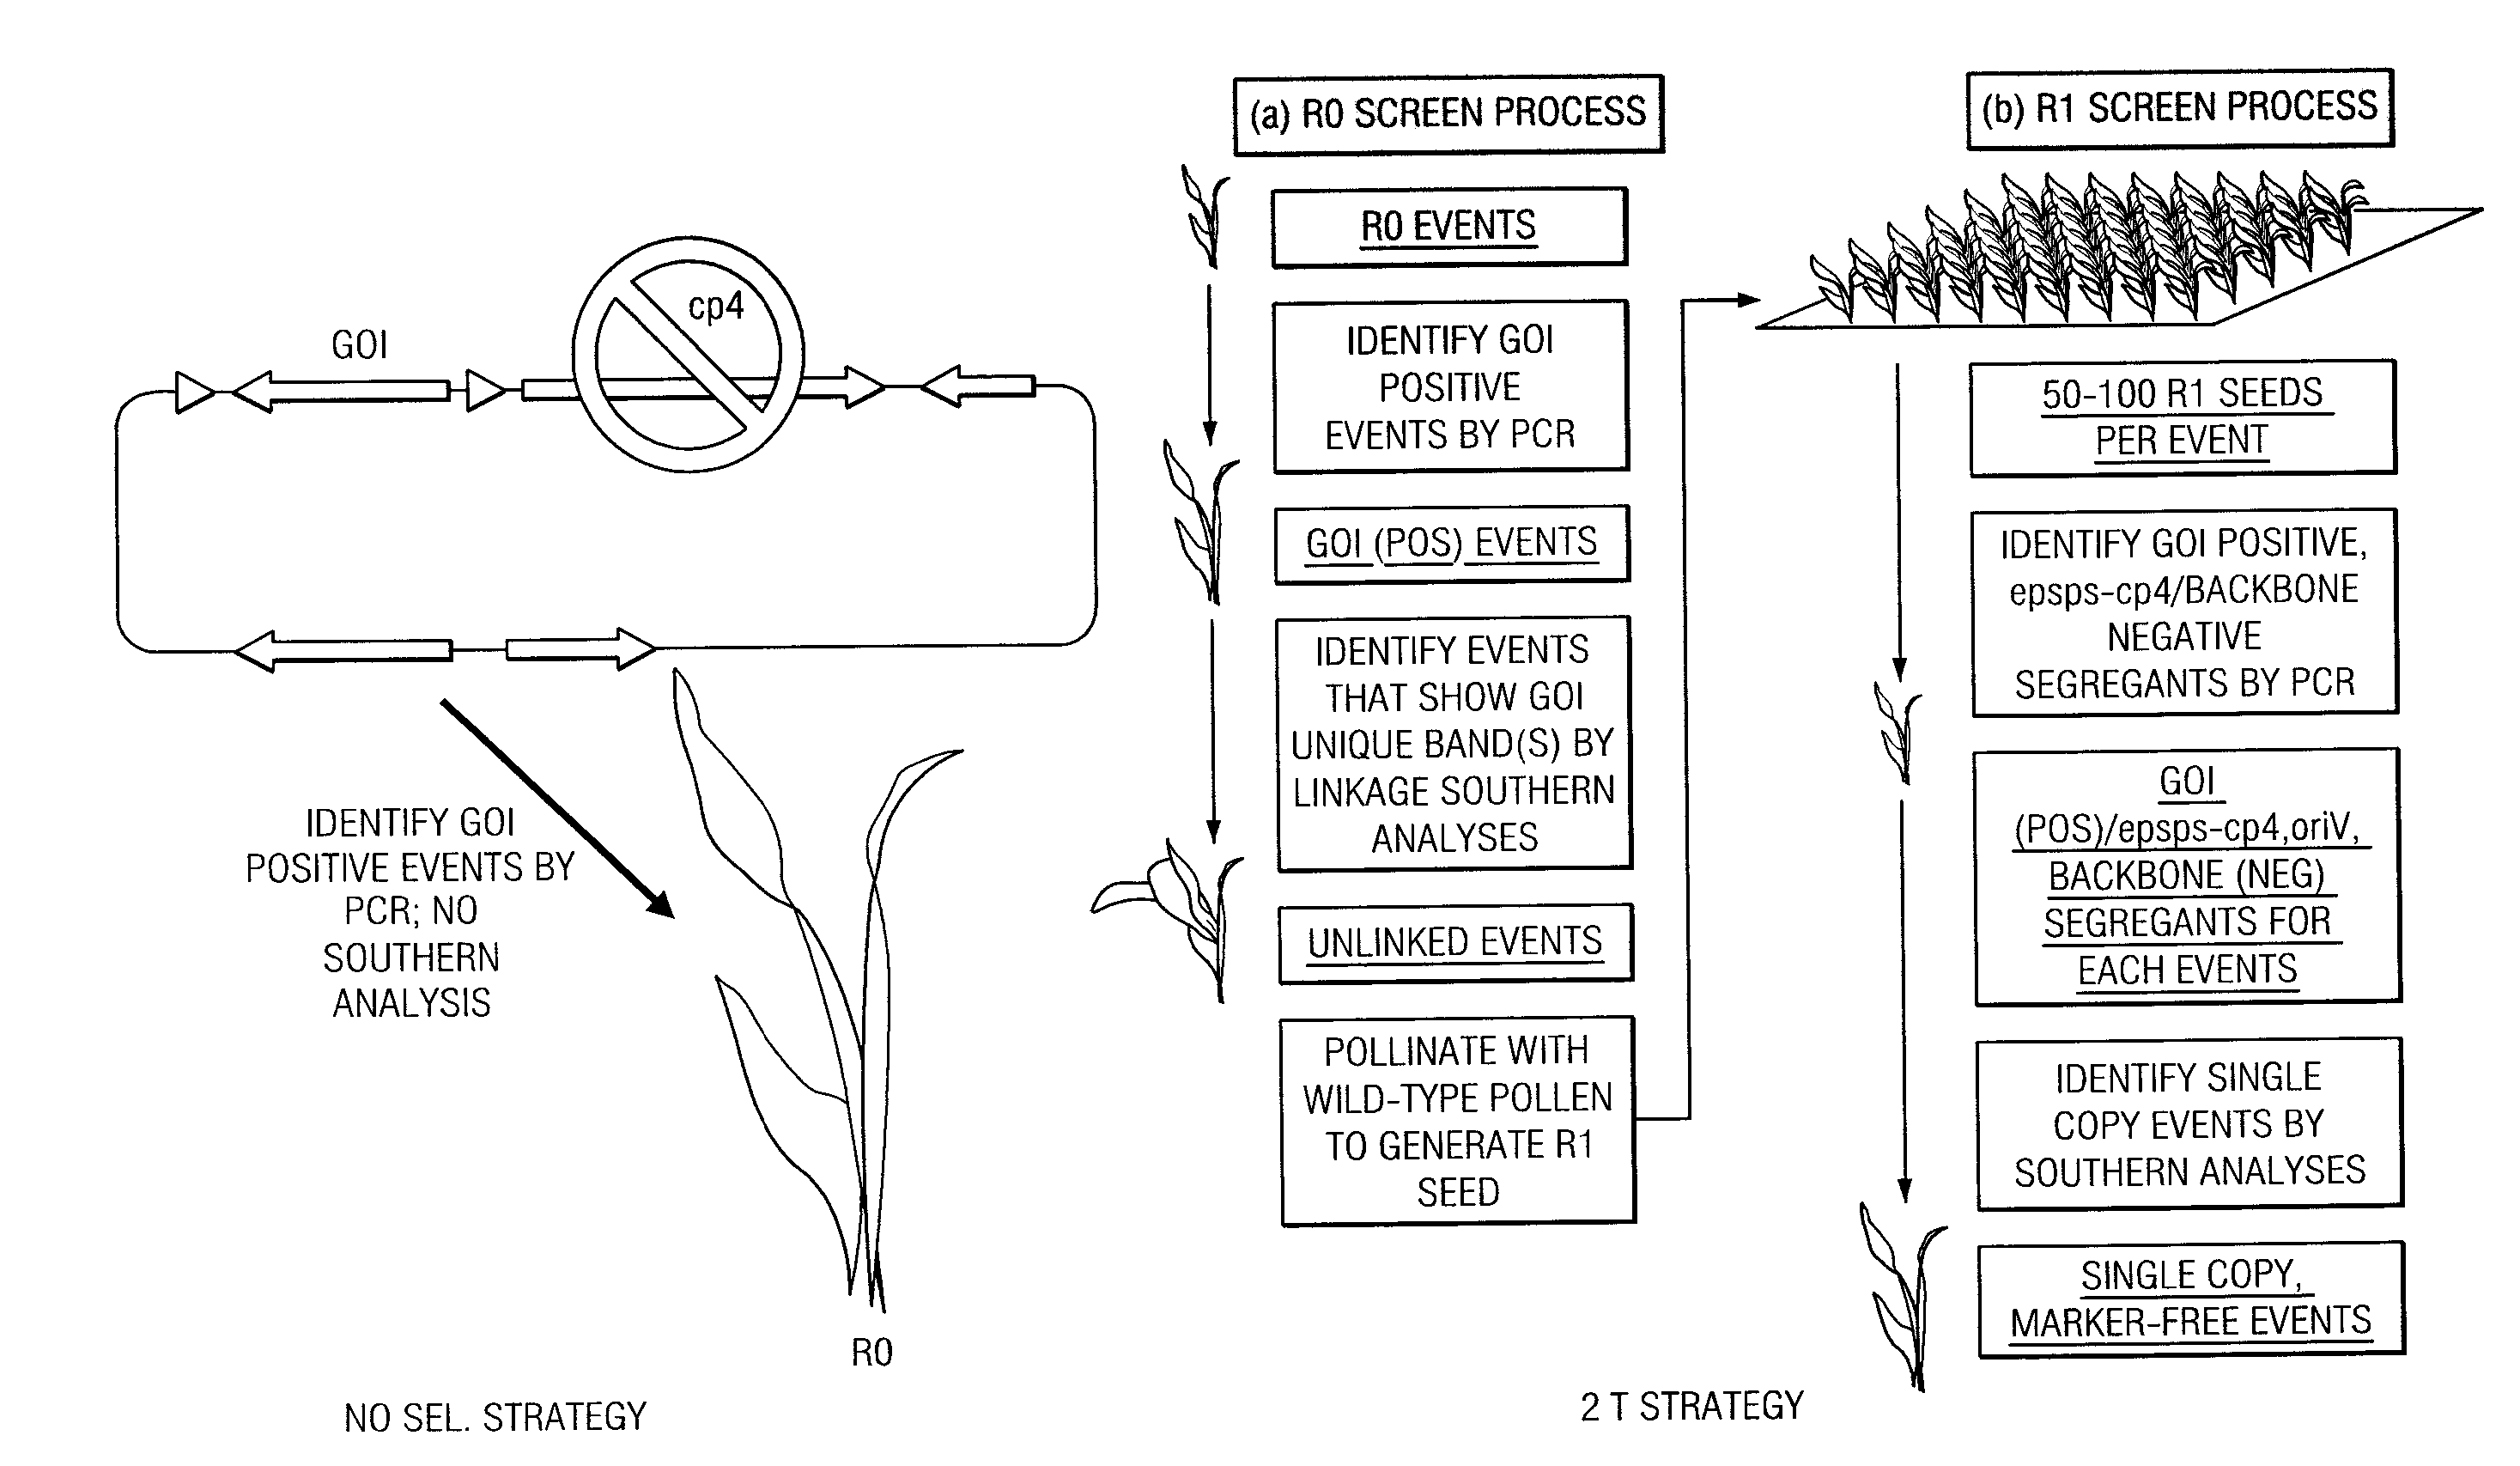 Plant transformation without selection